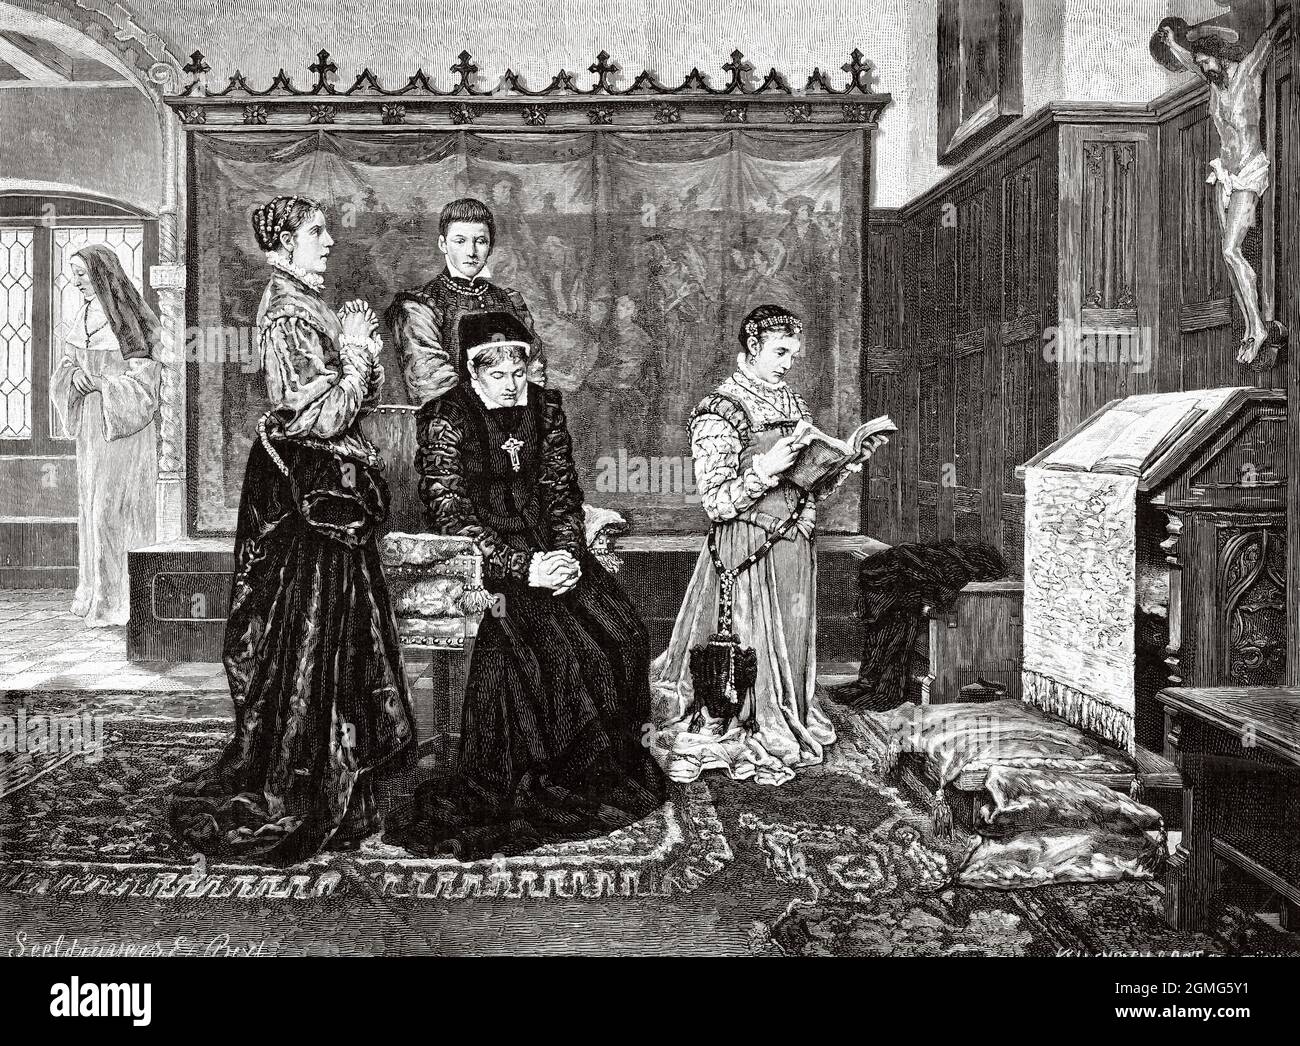 The widow of the Earl of Egmont, painting by Emiel Seeldrayers (1847-1933) Belgian painter. Old 19th century engraved illustration from La Ilustración Artística 1882 Stock Photo